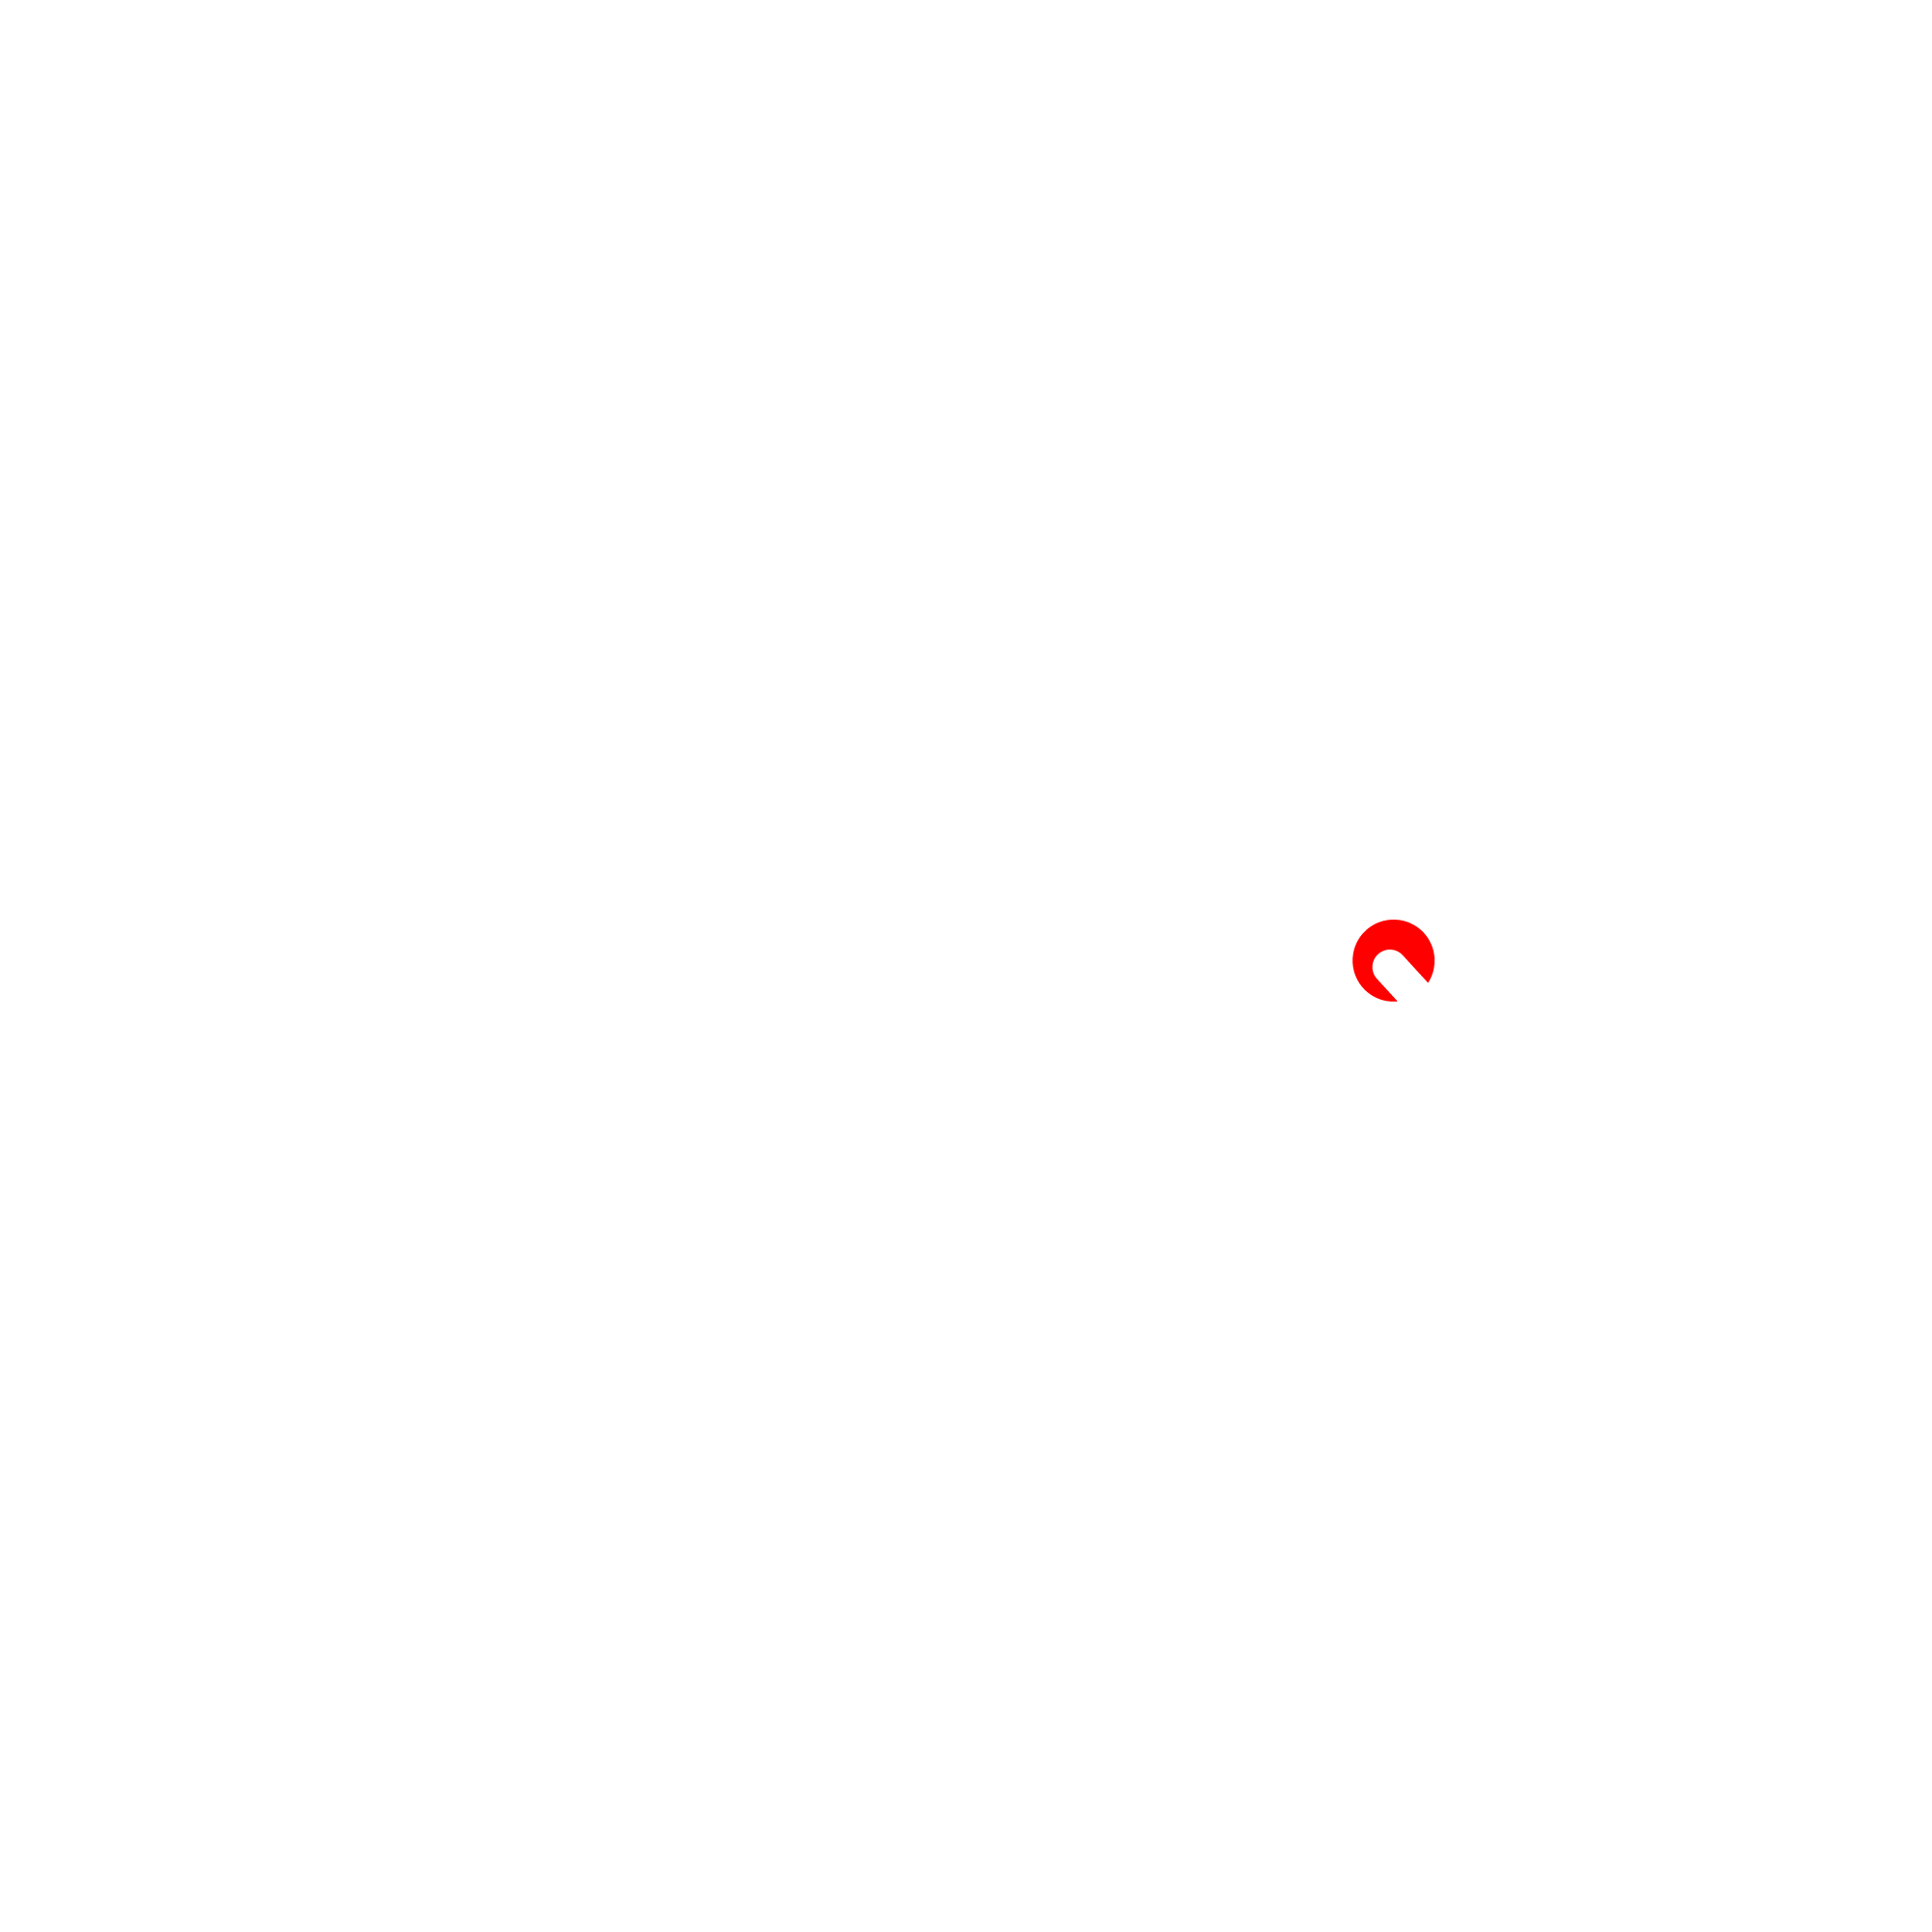 Red Stick Records